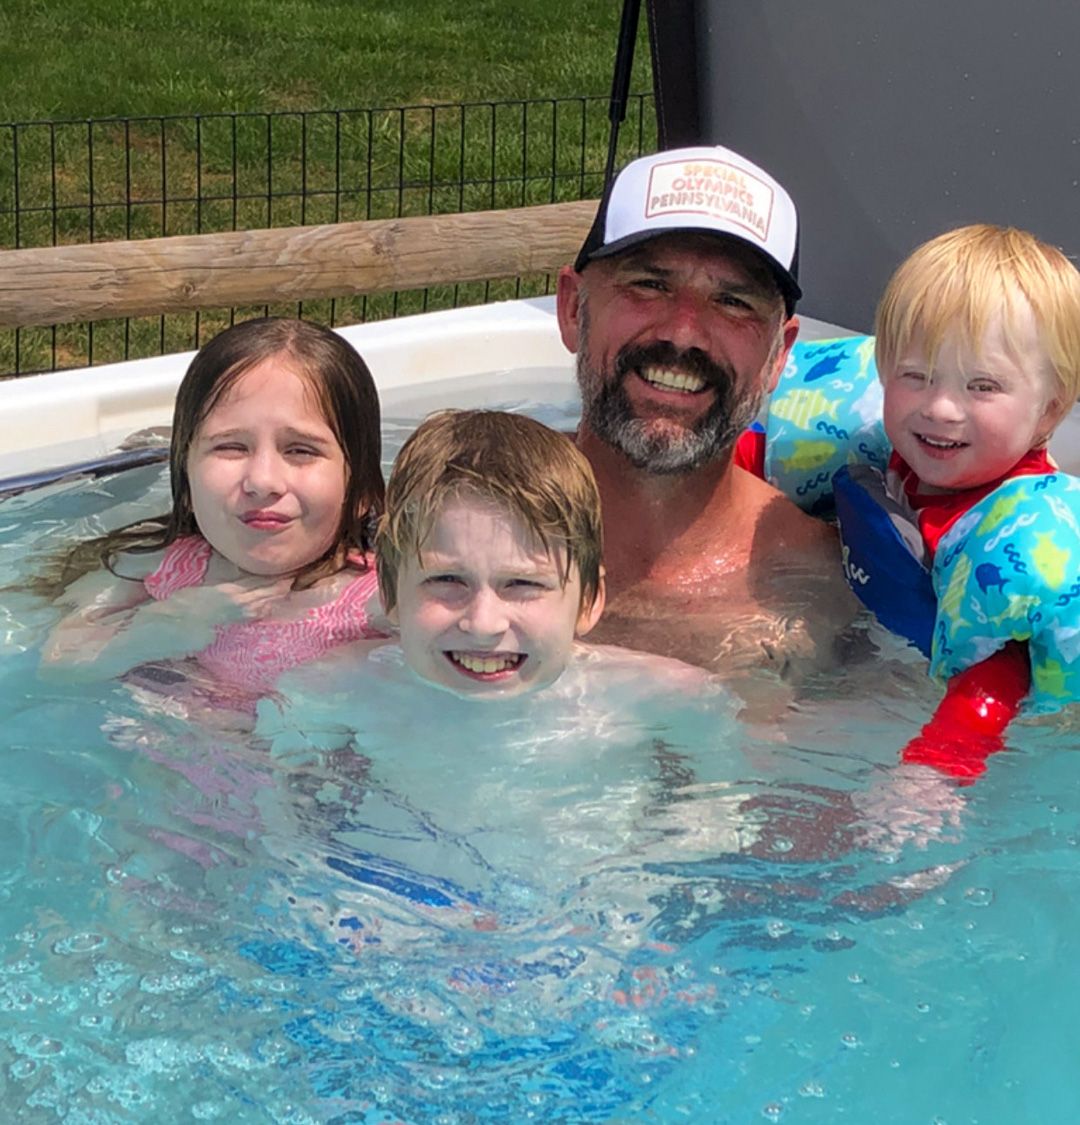 A picture of a man surrounded by his three children in their family pool, all smiling.